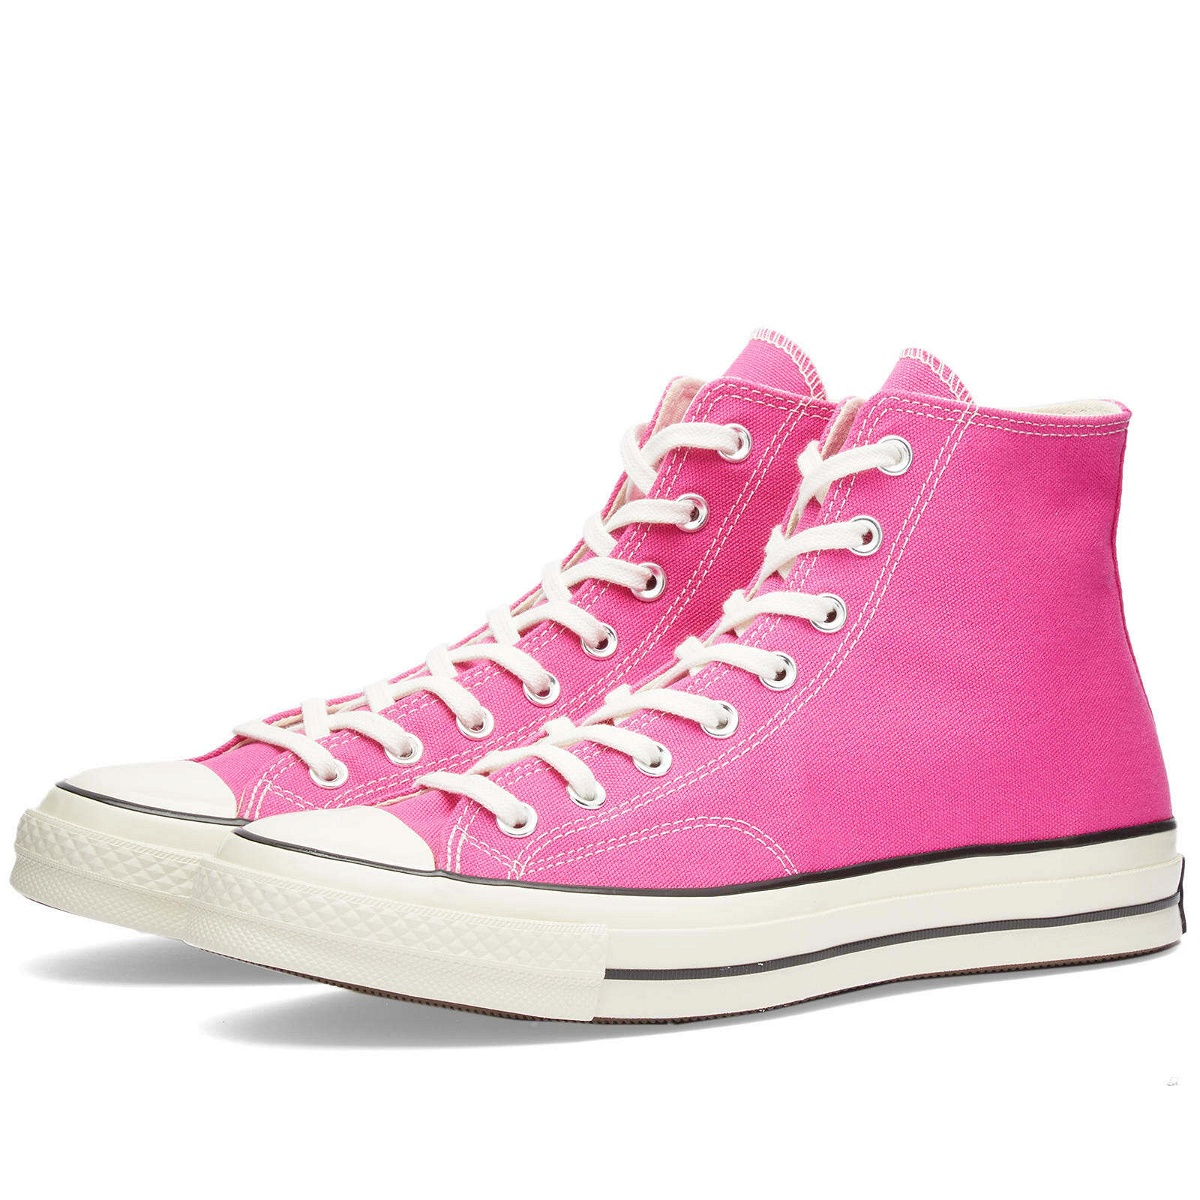 Photo: Converse Men's Chuck 70 Hi-Top Fall Tone Sneakers in Lucky Pink/Egret/Black